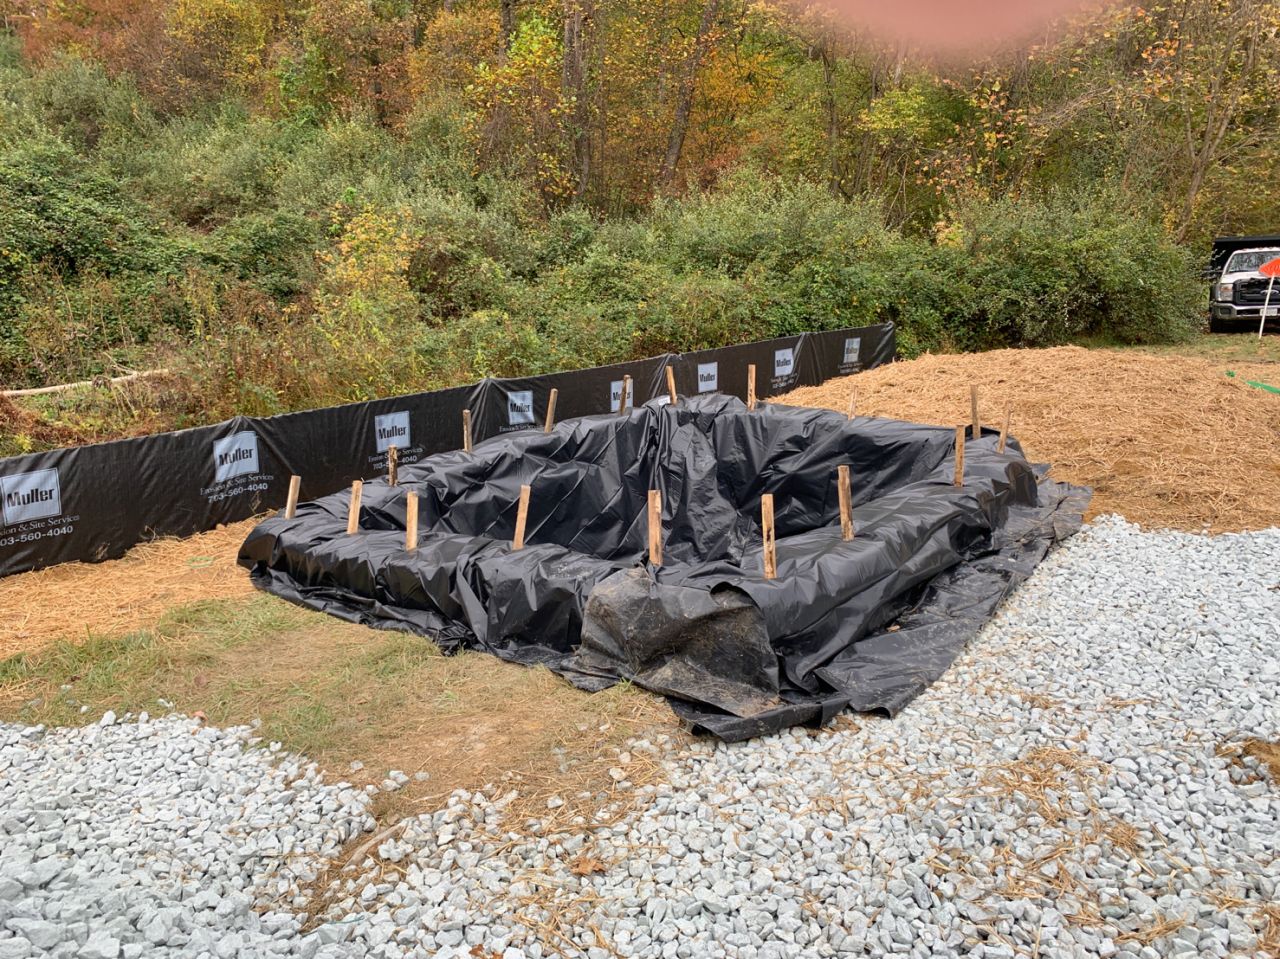 Black tarping over an erosion and sediment control element in a grassy area with gravel.